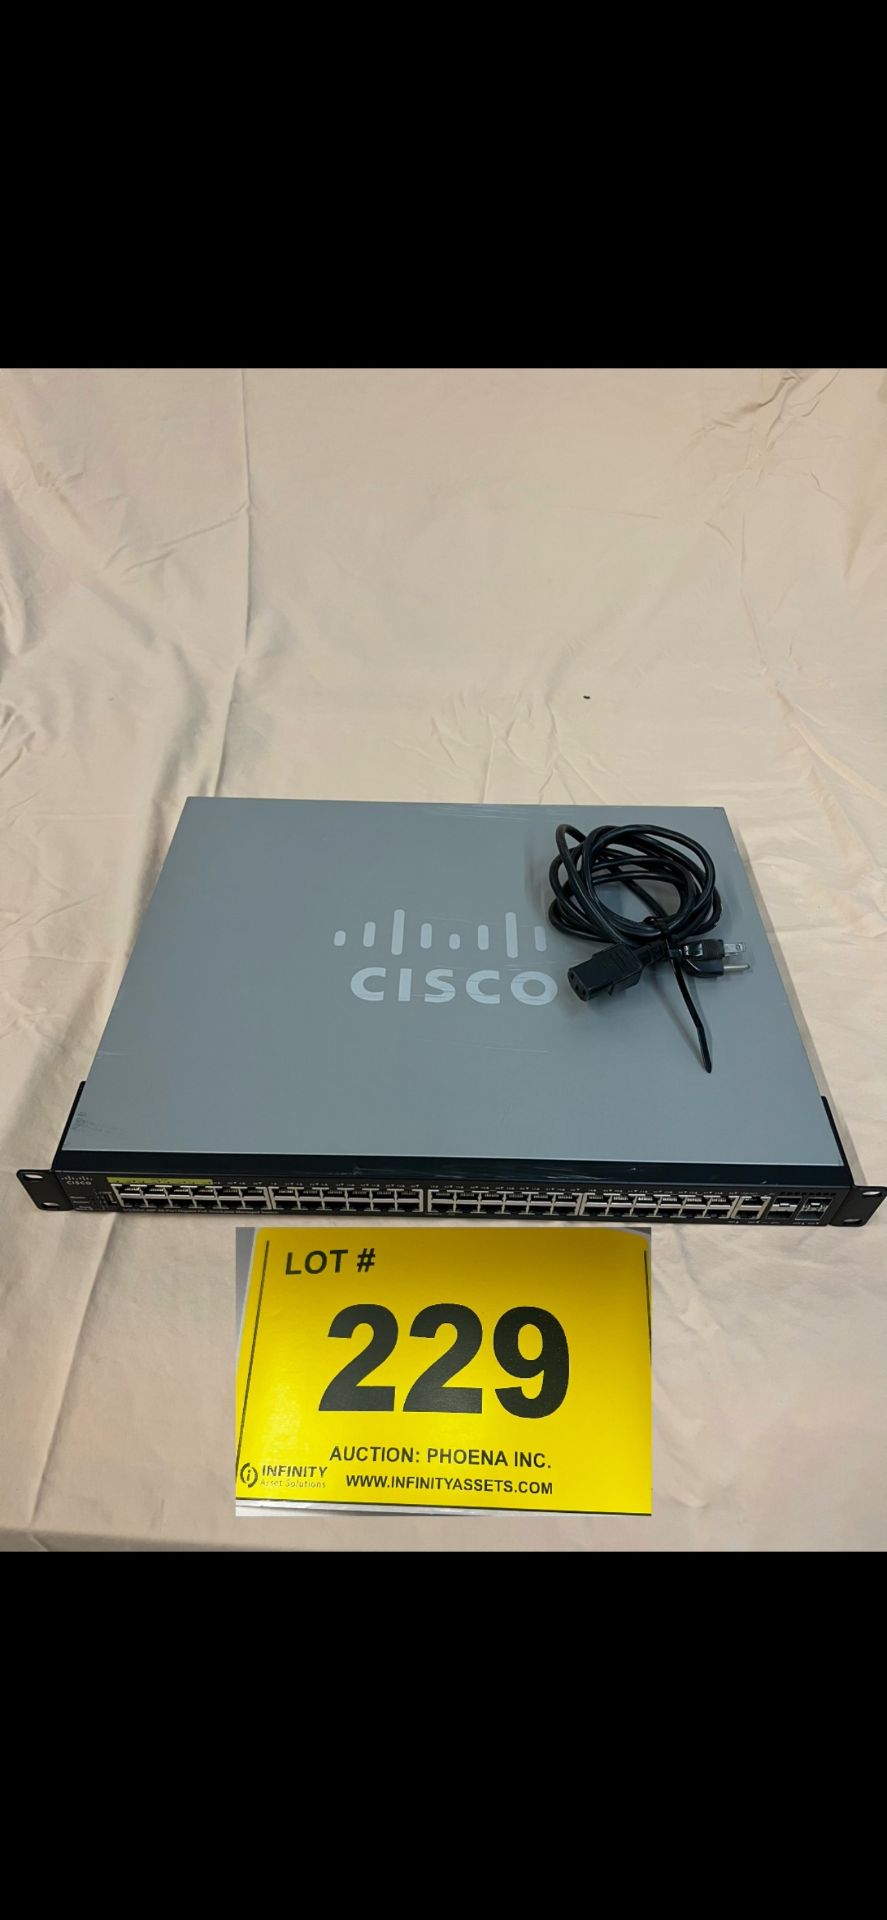 CISCO SG350X-48P 48-PORT GIGABIT POE STACKABLE MANAGED SWITCH, S/N DNI2224085Q (LOCATED IN